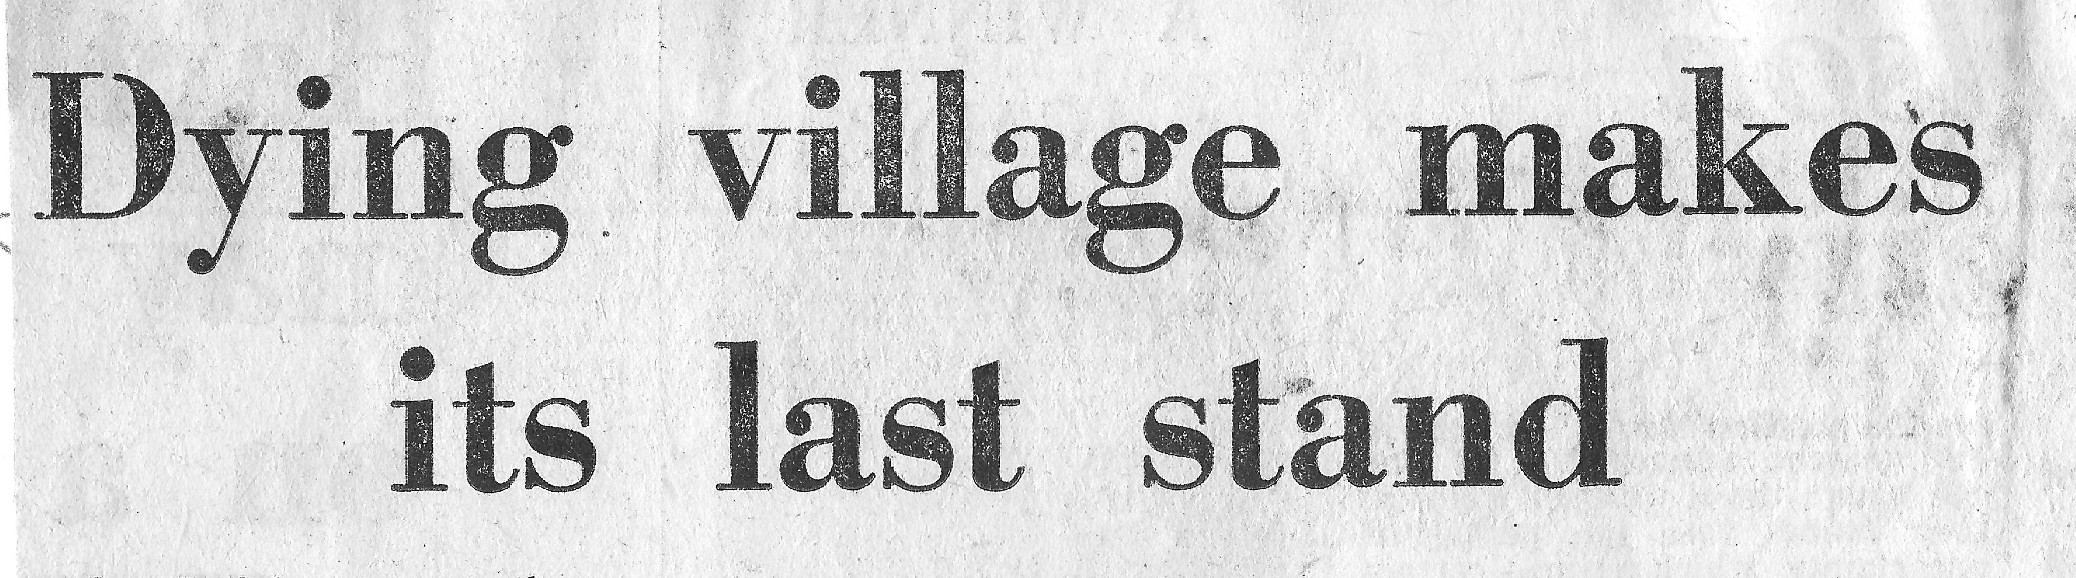 From The Northern Echo of October 20, 1964